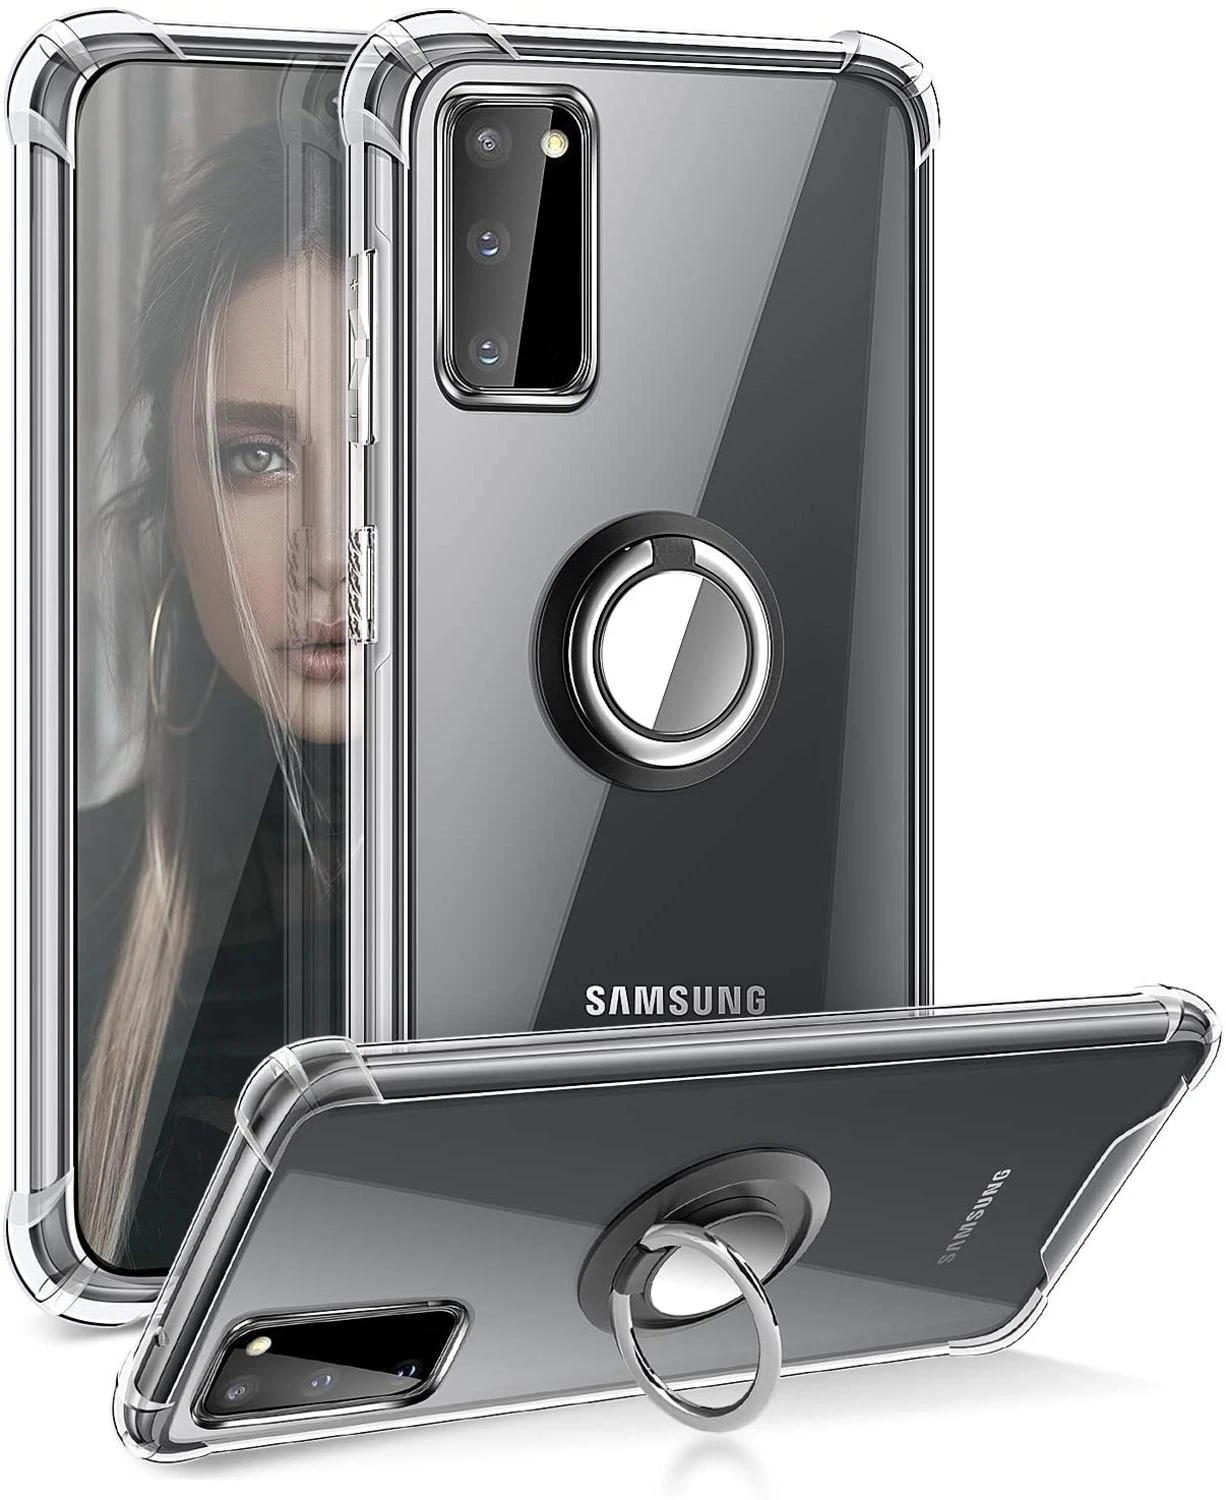 Shockproof Soft Ring Case For Samsung Galaxy S10 M11 M21 Note 10 Lite 5G S10e S10+ Plus S20 Ultra A51 A71 M31 A41 A21 A50S A30